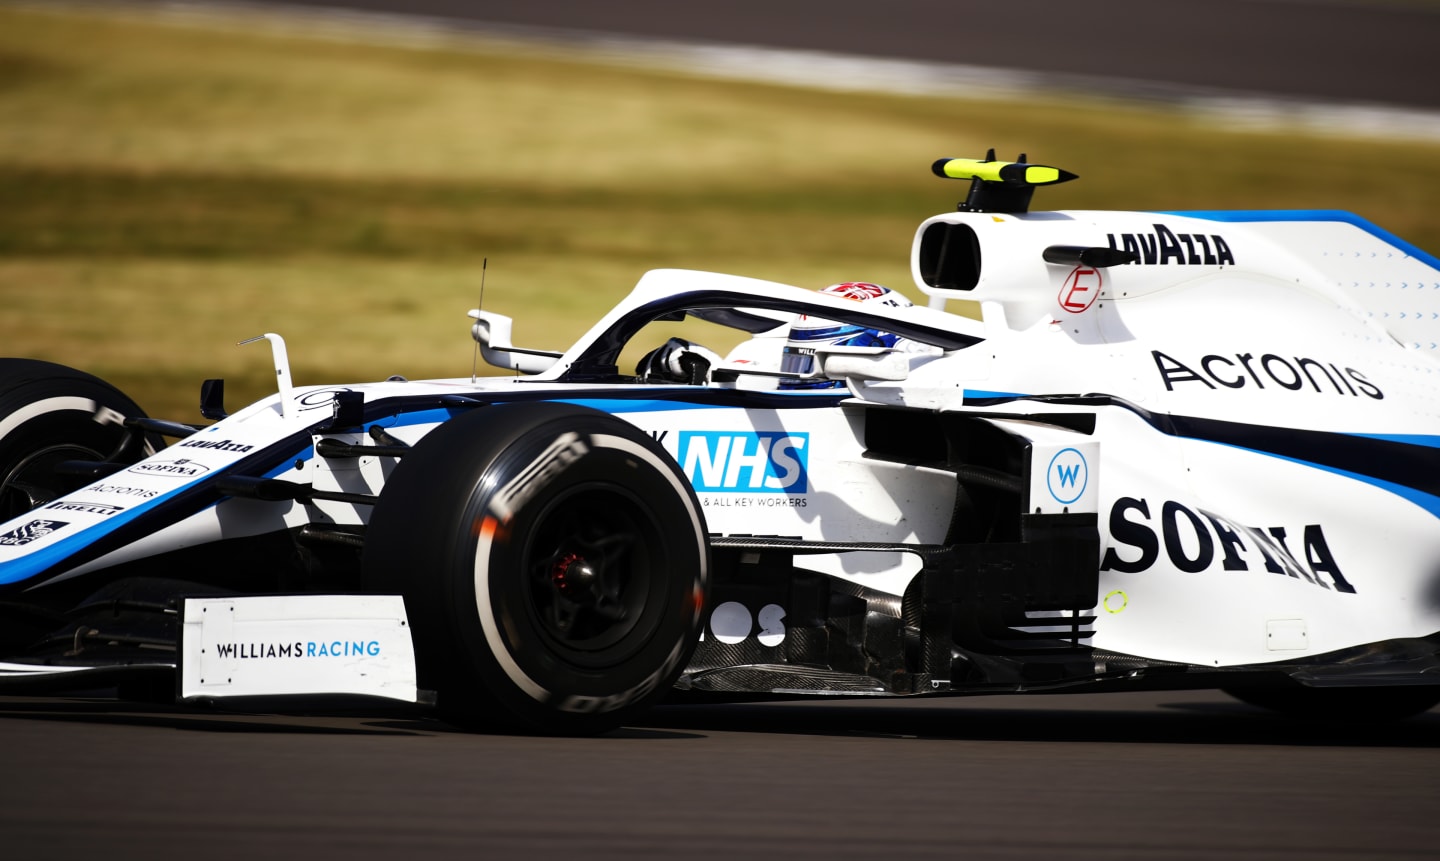 NORTHAMPTON, ENGLAND - AUGUST 02: Nicholas Latifi of Canada driving the (6) Williams Racing FW43 Mercedes drives on track during the F1 Grand Prix of Great Britain at Silverstone on August 02, 2020 in Northampton, England. (Photo by Bryn Lennon/Getty Images)